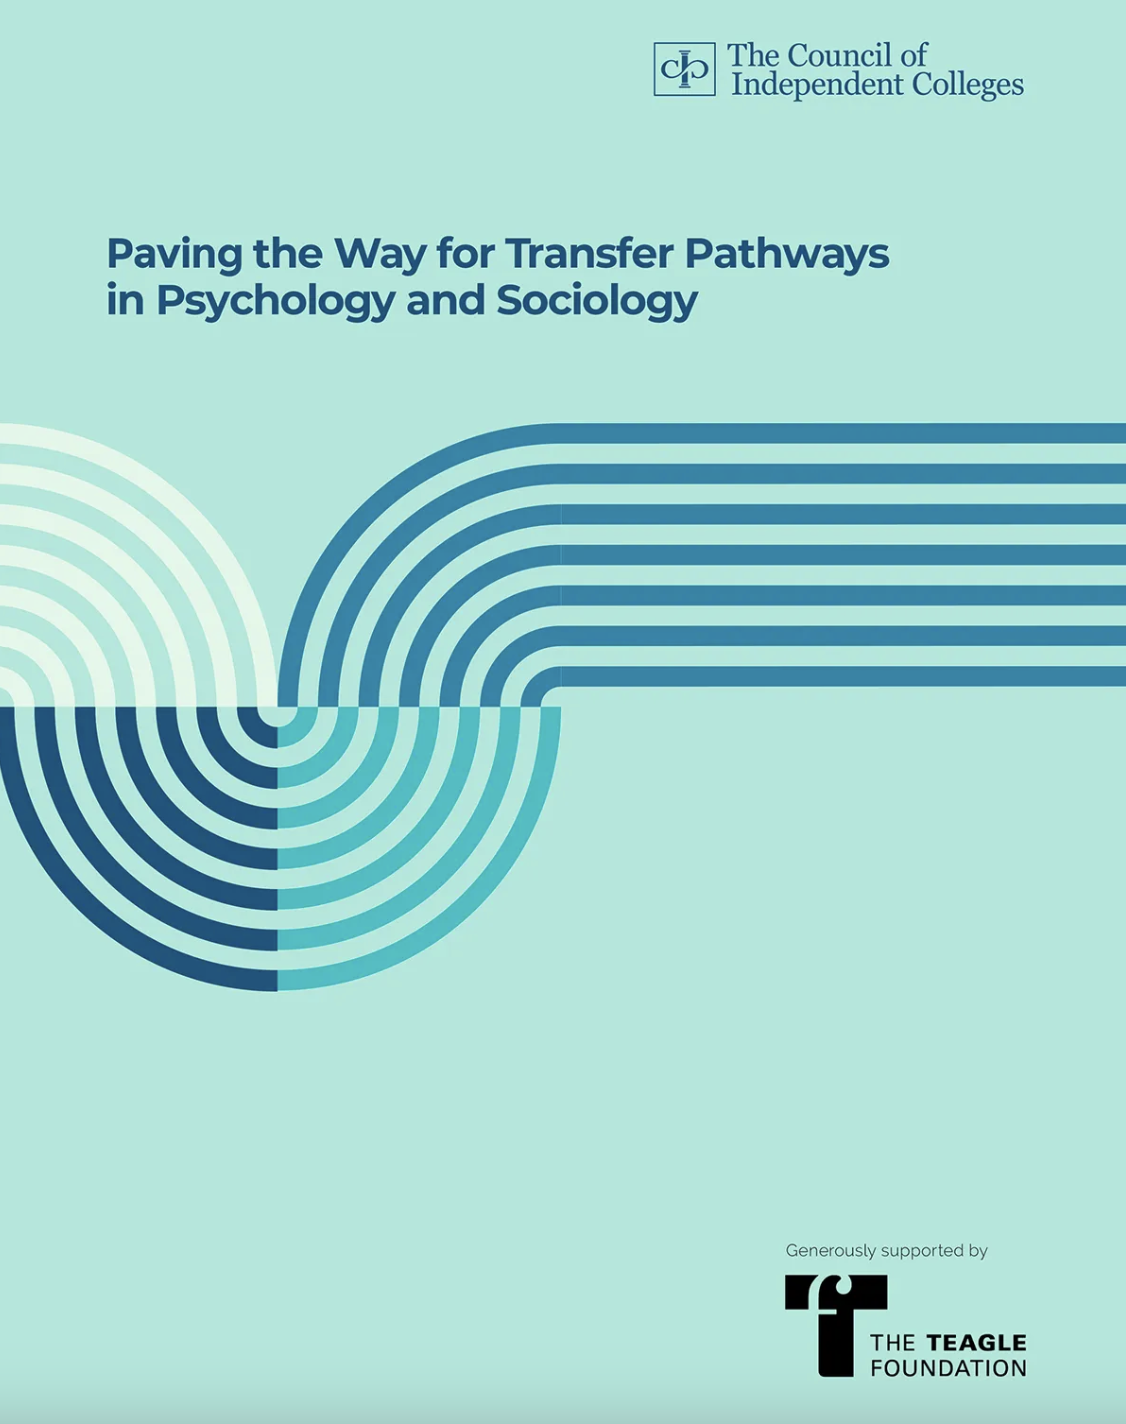 Paving the Way for Transfer Pathways in Psychology and Sociology